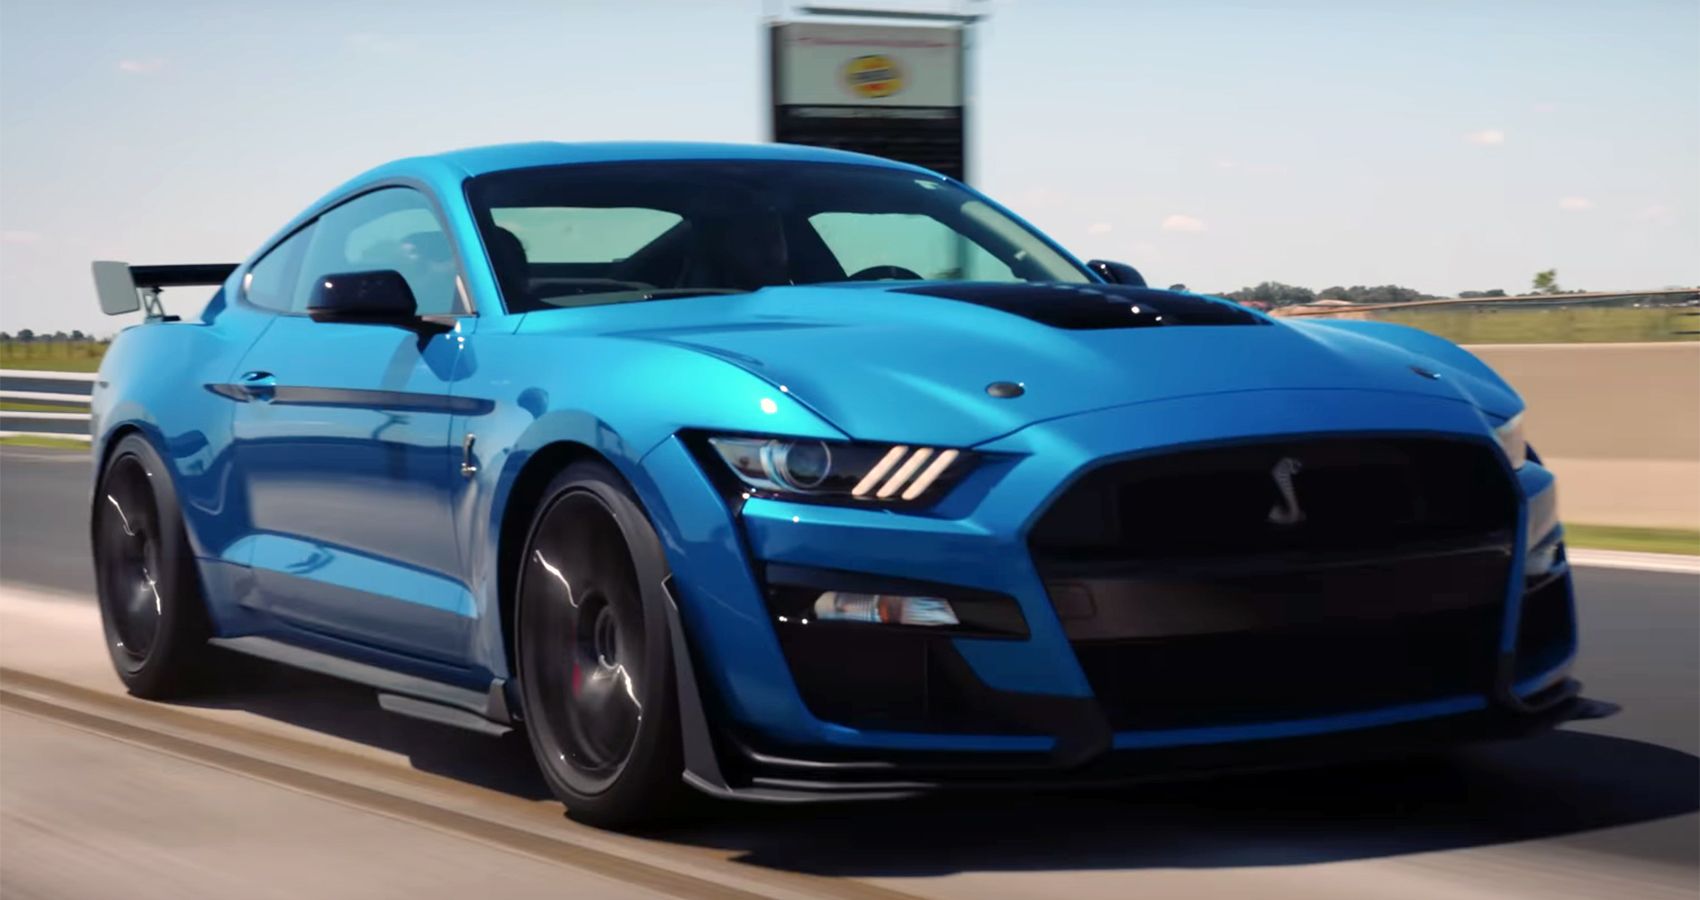 Why The Ford Shelby Mustang GT500 Has One Of The Greatest Resale Values In 2022